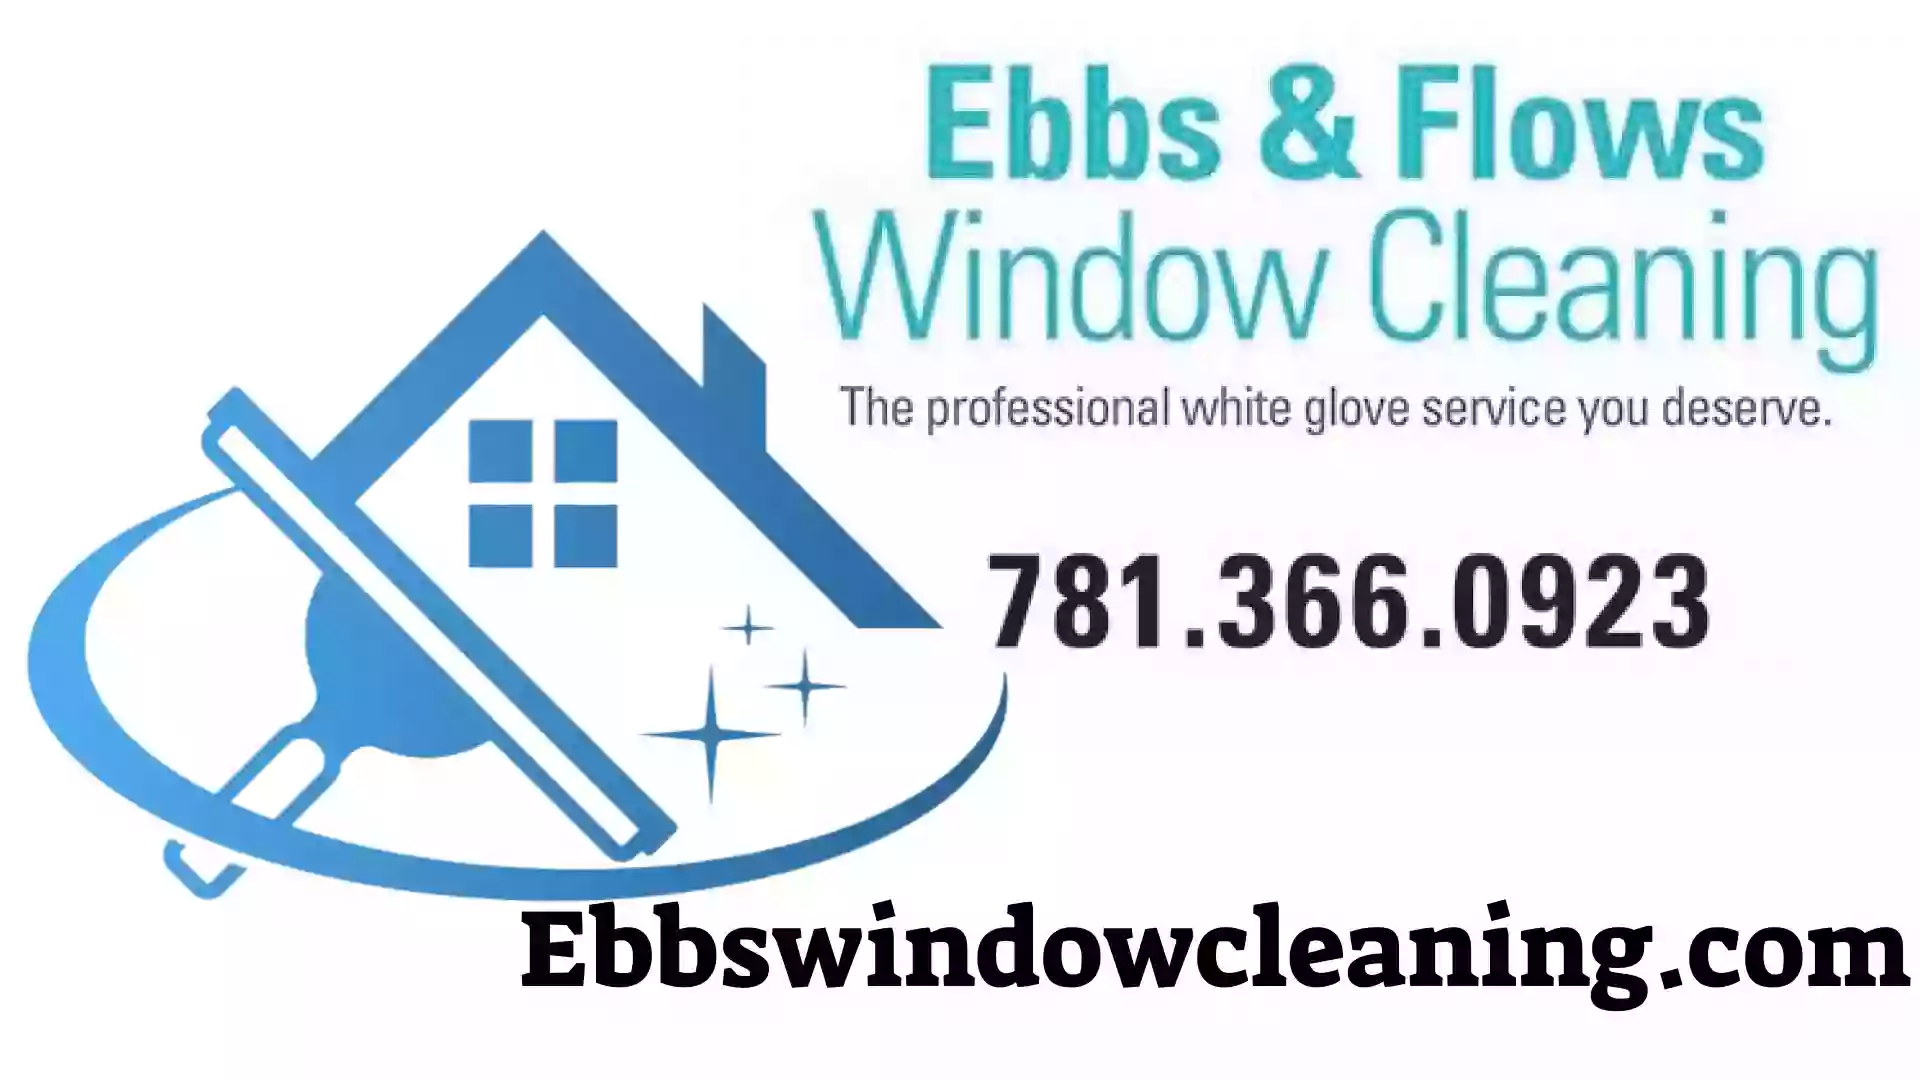 Ebbs and Flows Window Cleaning